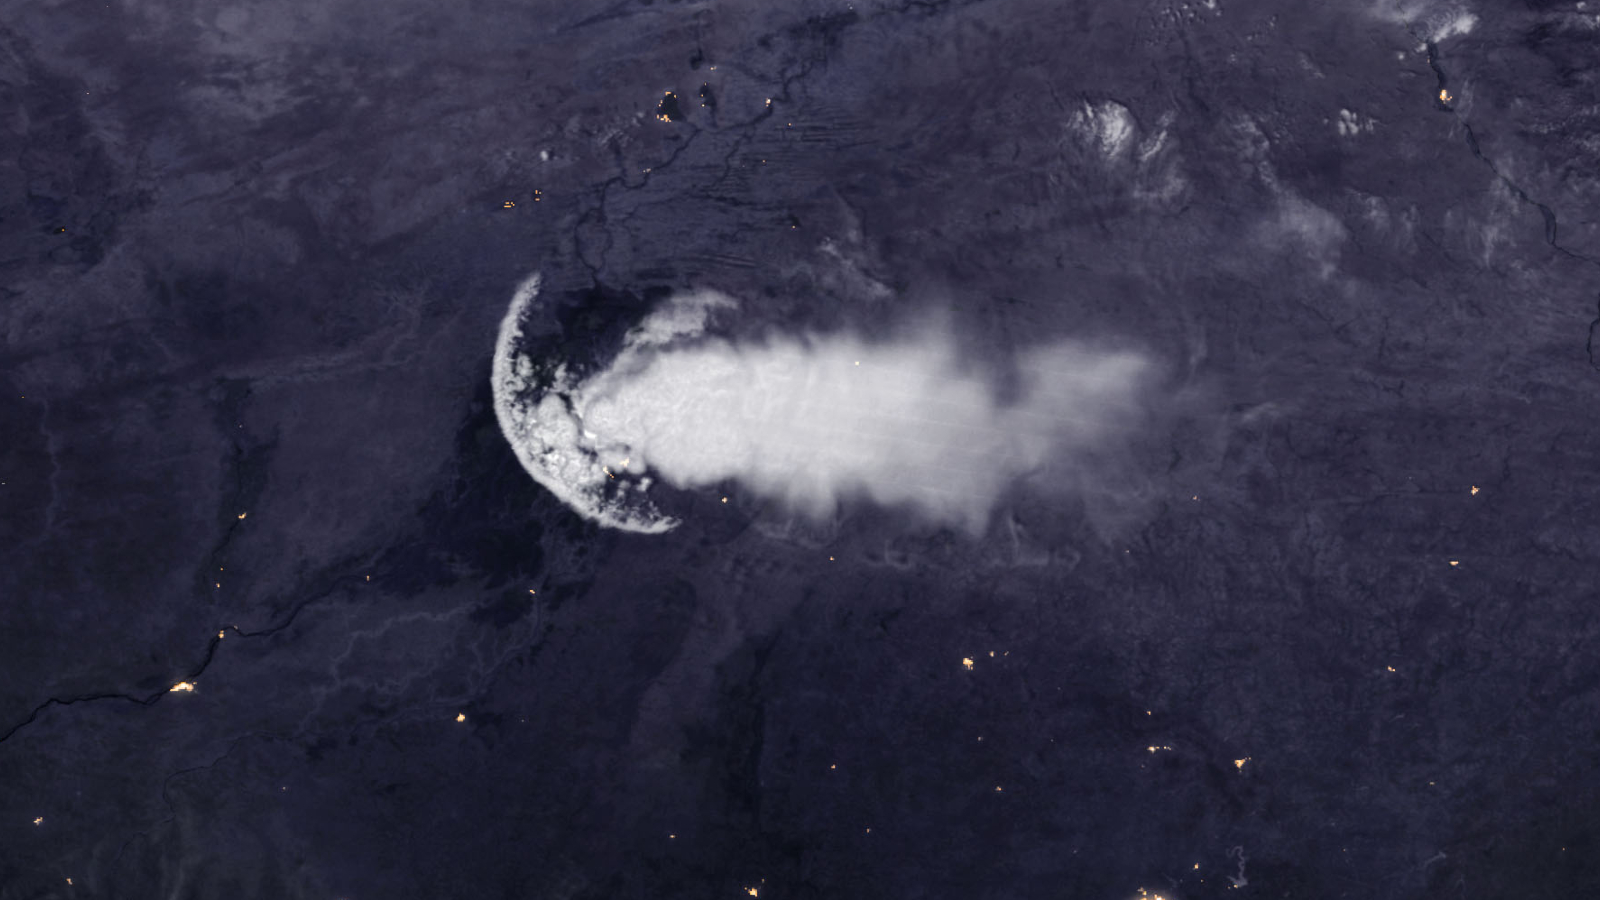 Earth from space: Rare phenomenon transforms African thunderstorm into giant ethereal 'jellyfish'